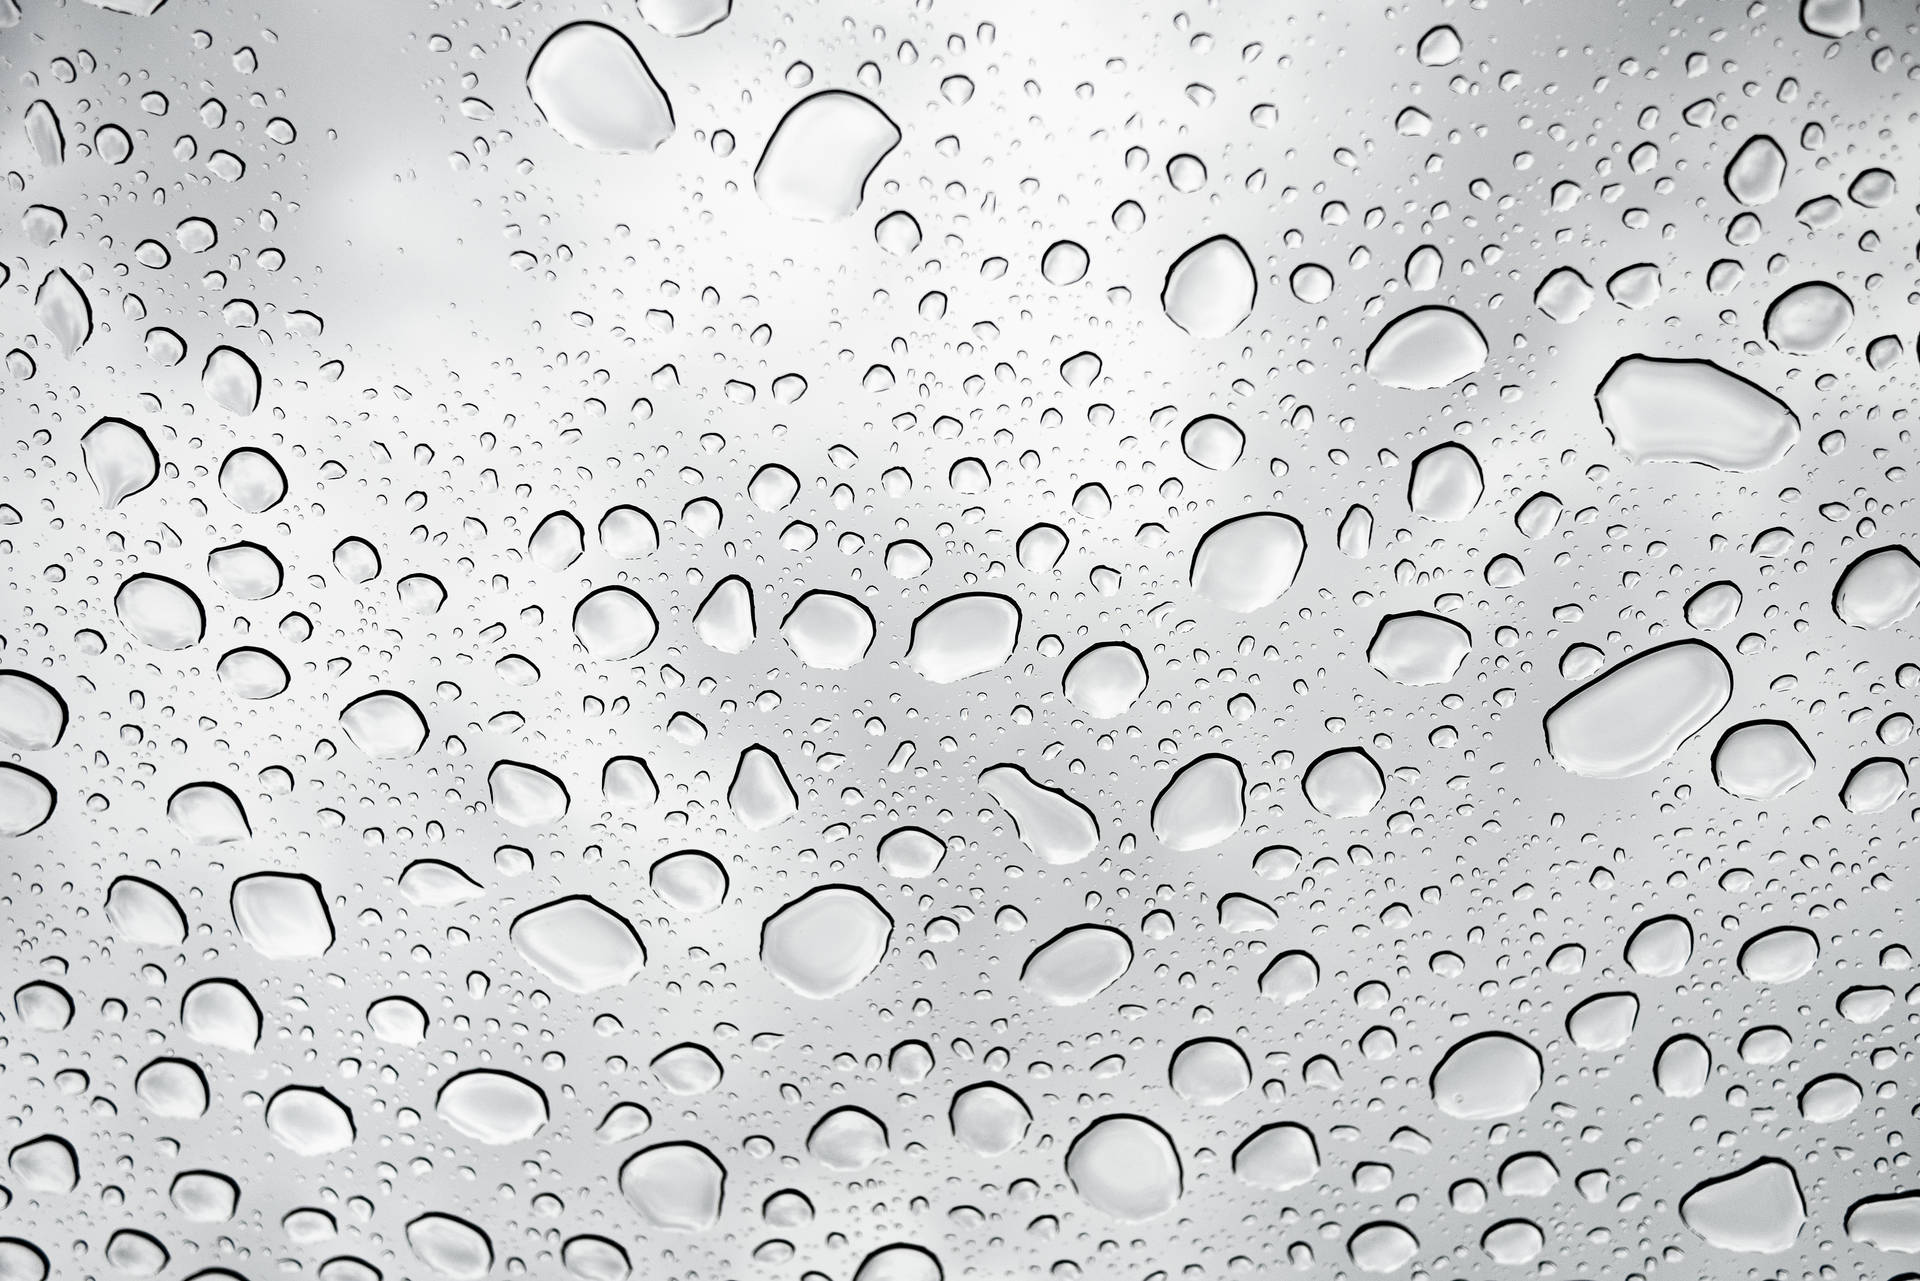 Raining Droplets On Glass Surface Background